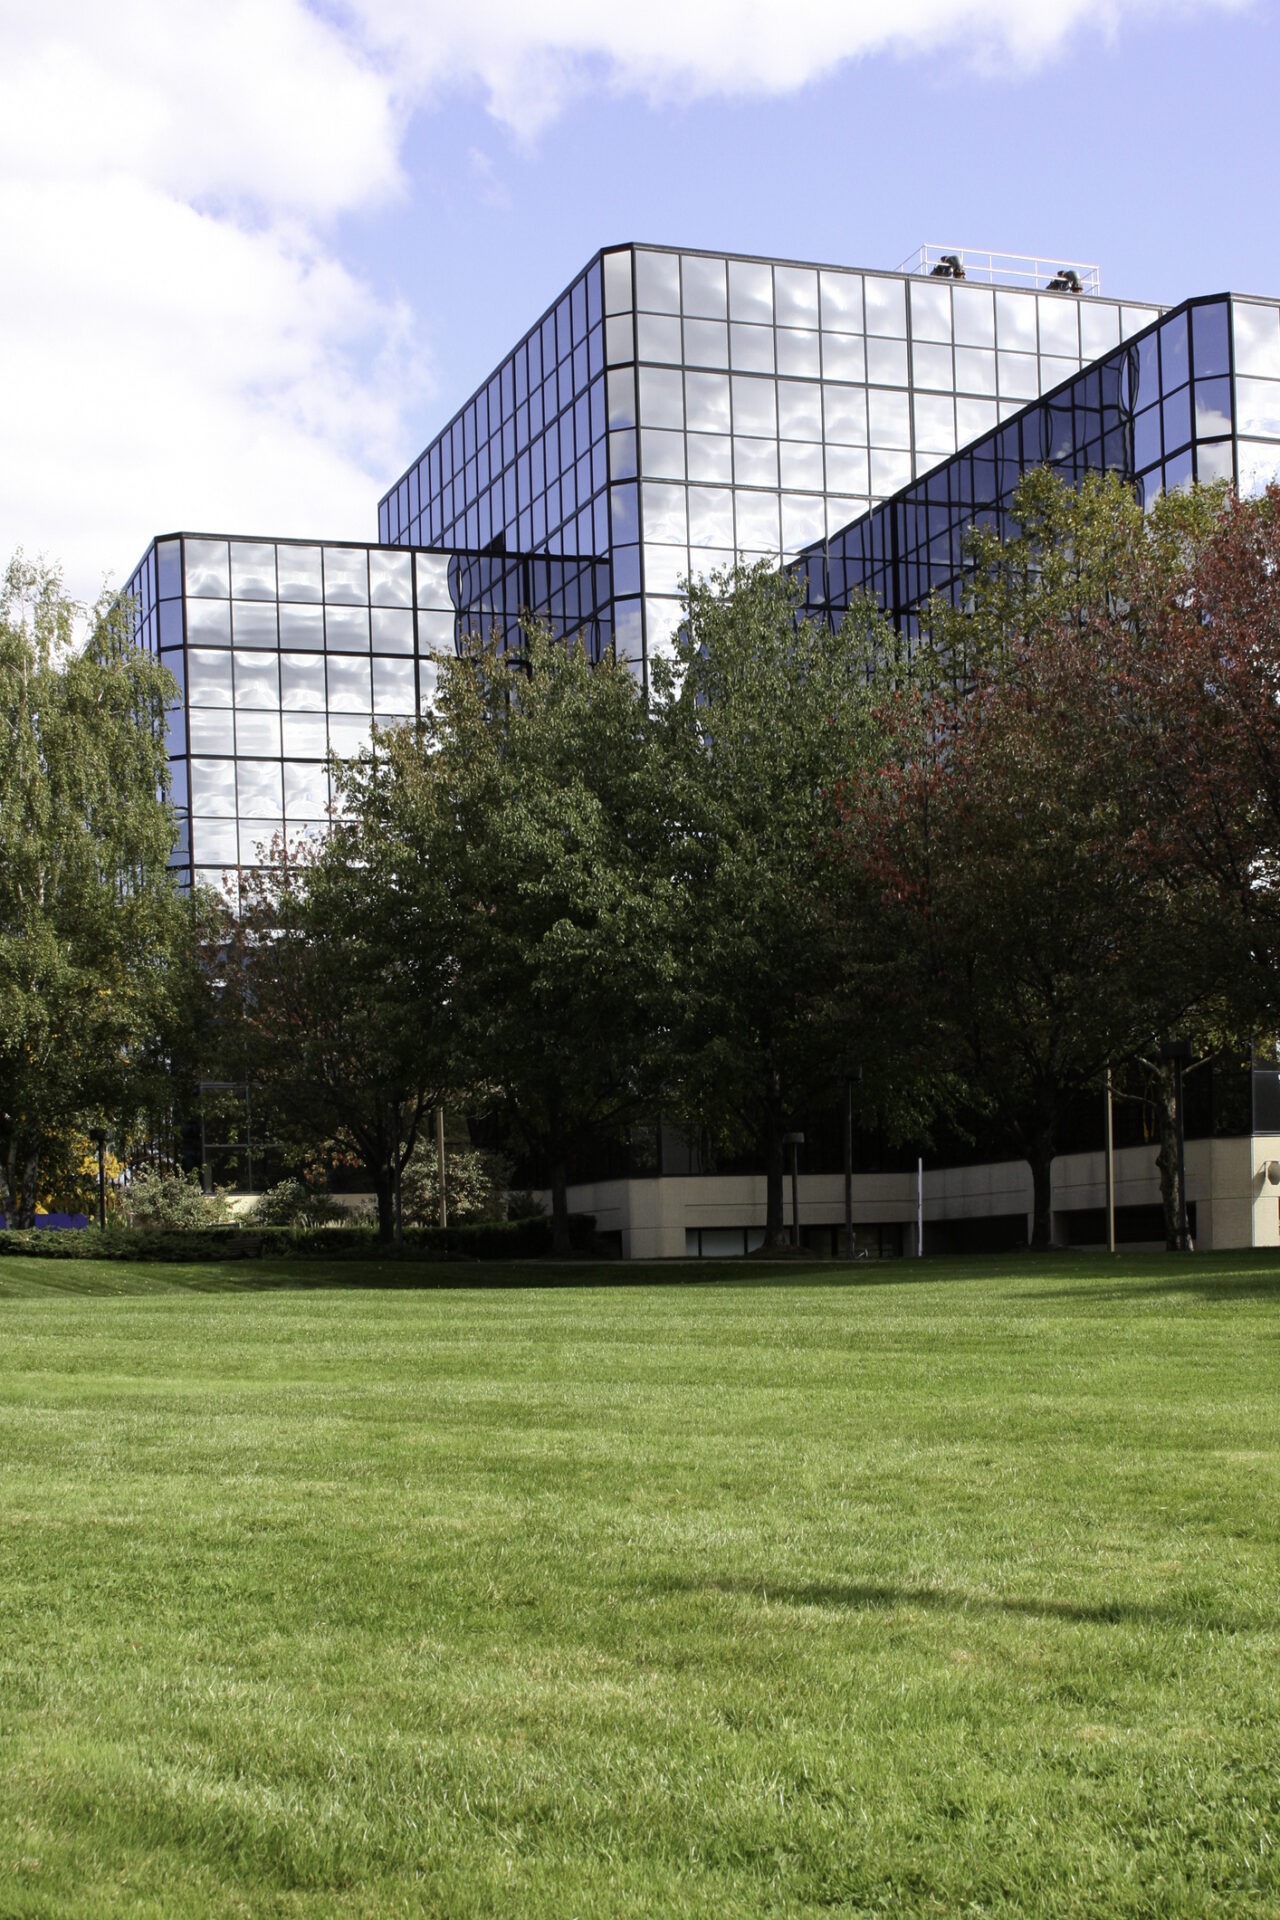 A modern glass office building overlooks a manicured lawn with trees showing early autumn colors under a partly cloudy sky.